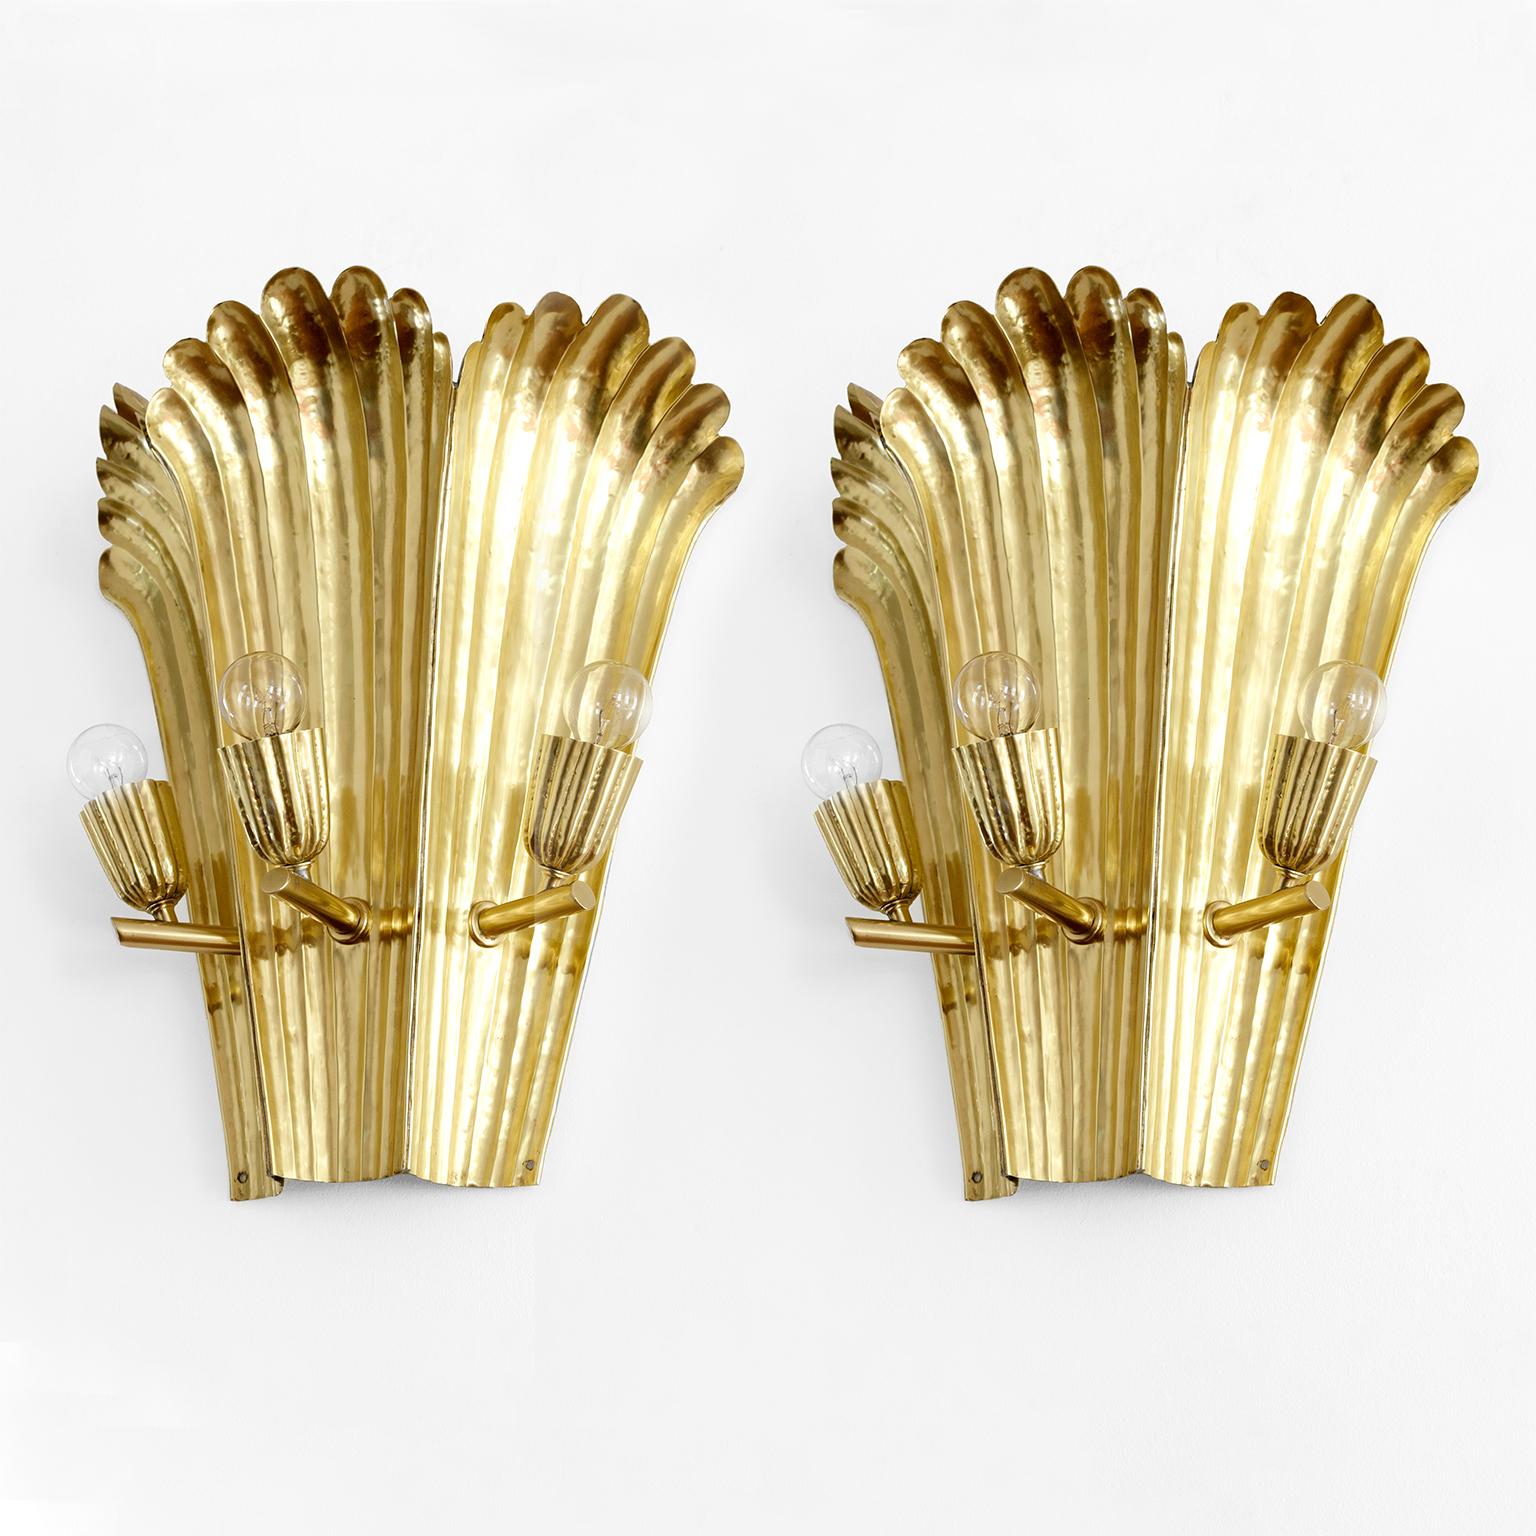 A.W Borgh designed pair (one of two available) Swedish Grace, 1920’s wall sconces. these were hand crafted and made of hammered brass. Each has 3 lights and uses candelabra base sockets. Newly wired for use in the USA, each sconce has a signed